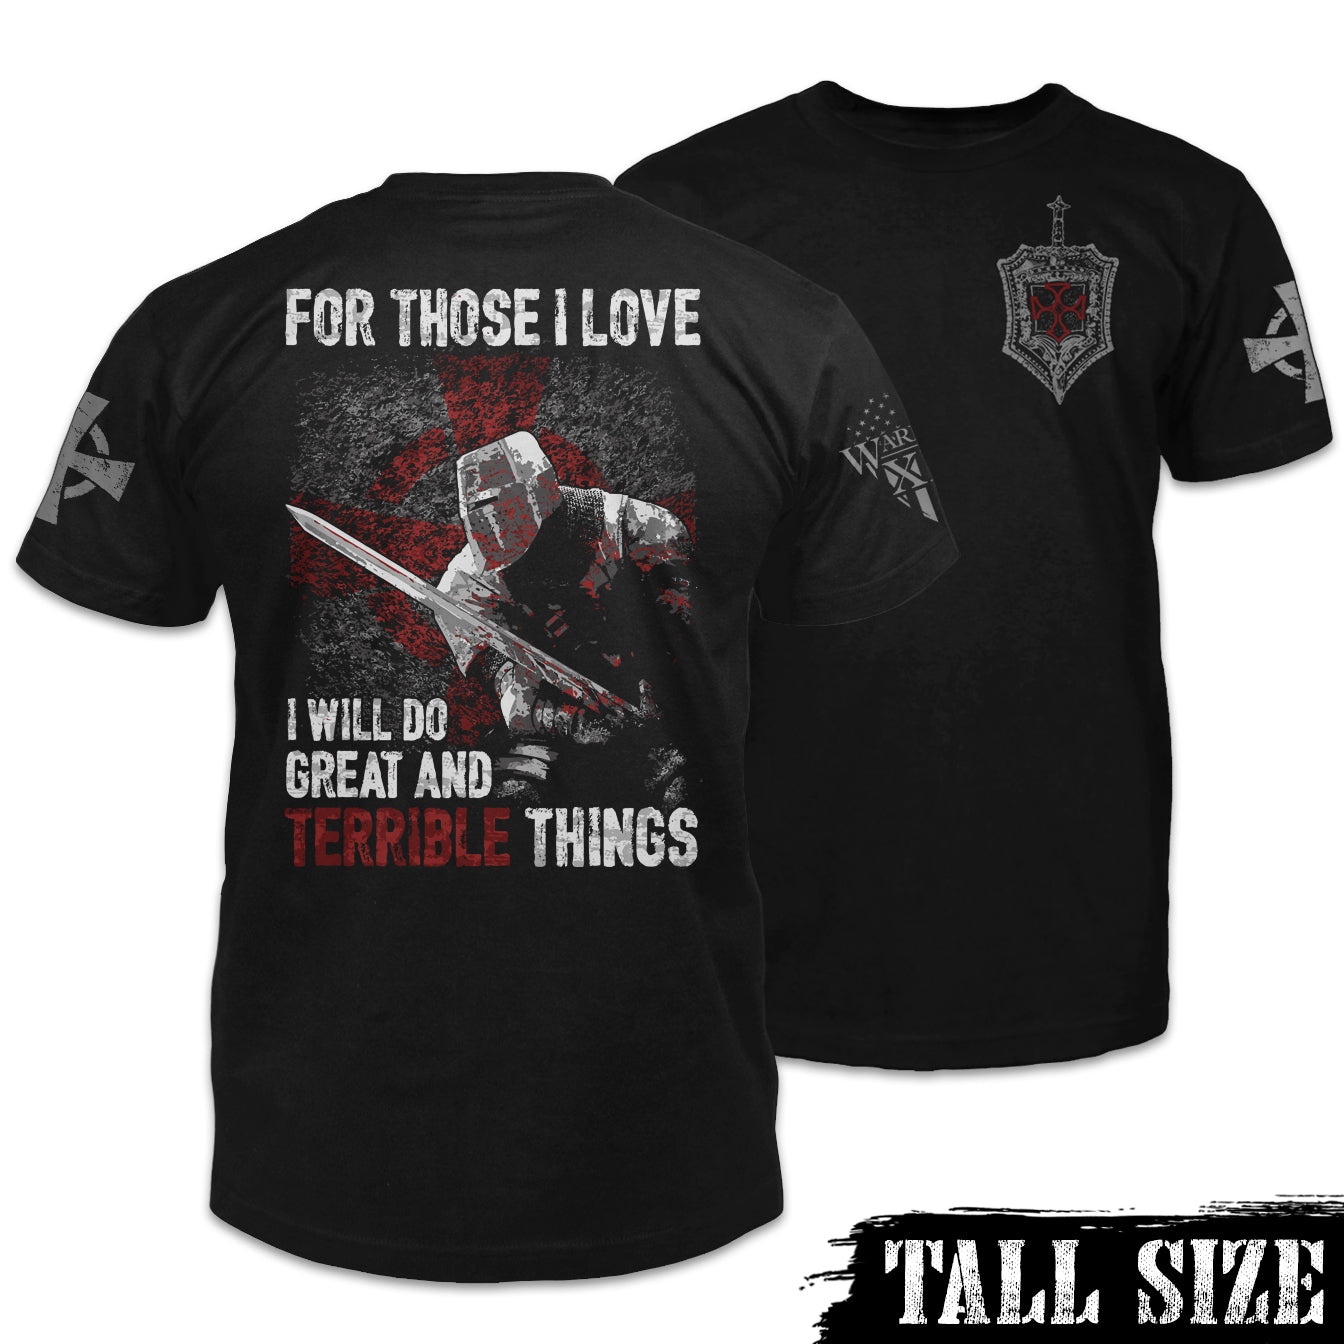 Front & back black tall size shirt with the words 'For Those I Love, I Will Do Great And Terrible Things" with a knights templar ready for battle printed on the shirt.